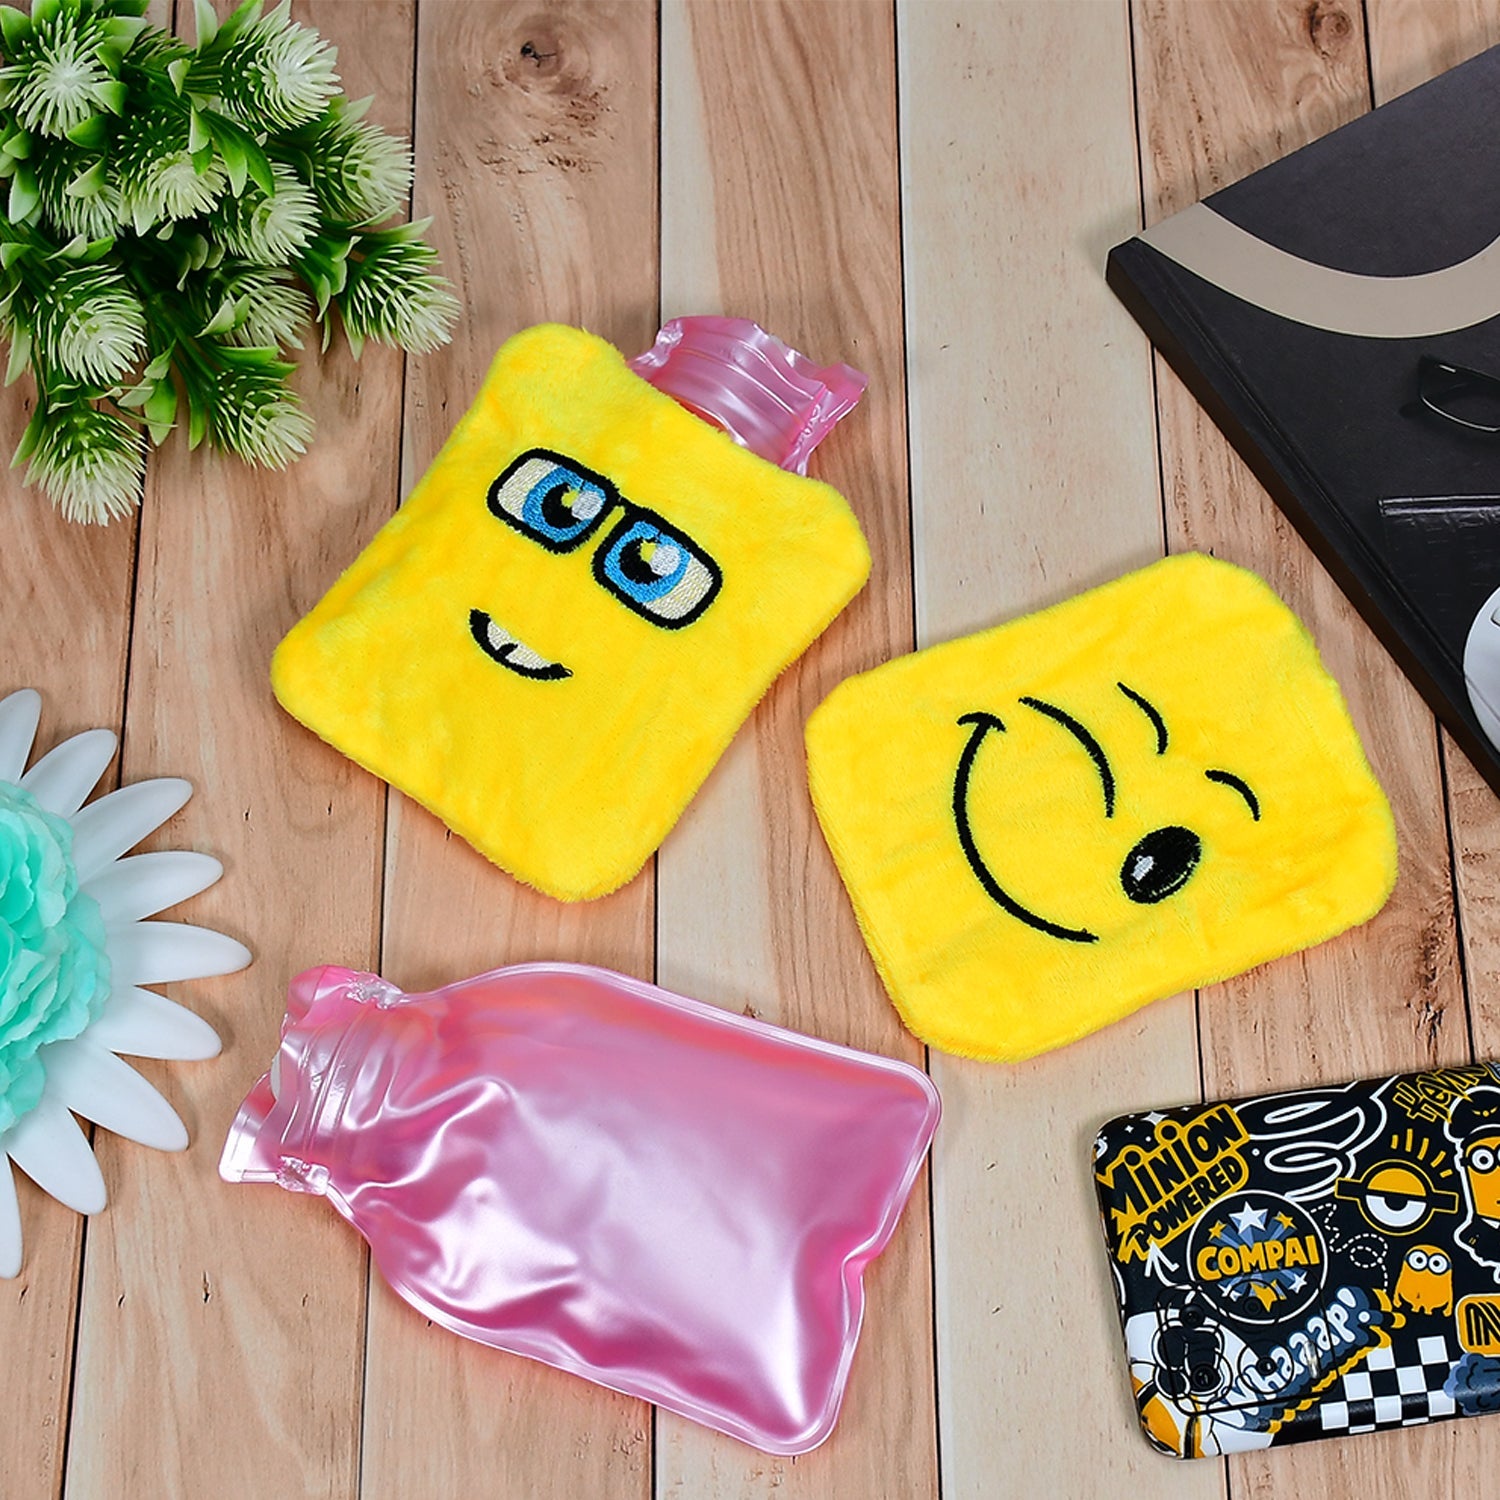 6535 1pc Mix Emoji designs small Hot Water Bag with Cover for Pain Relief, Neck, Shoulder Pain and Hand, Feet Warmer, Menstrual Cramps. 